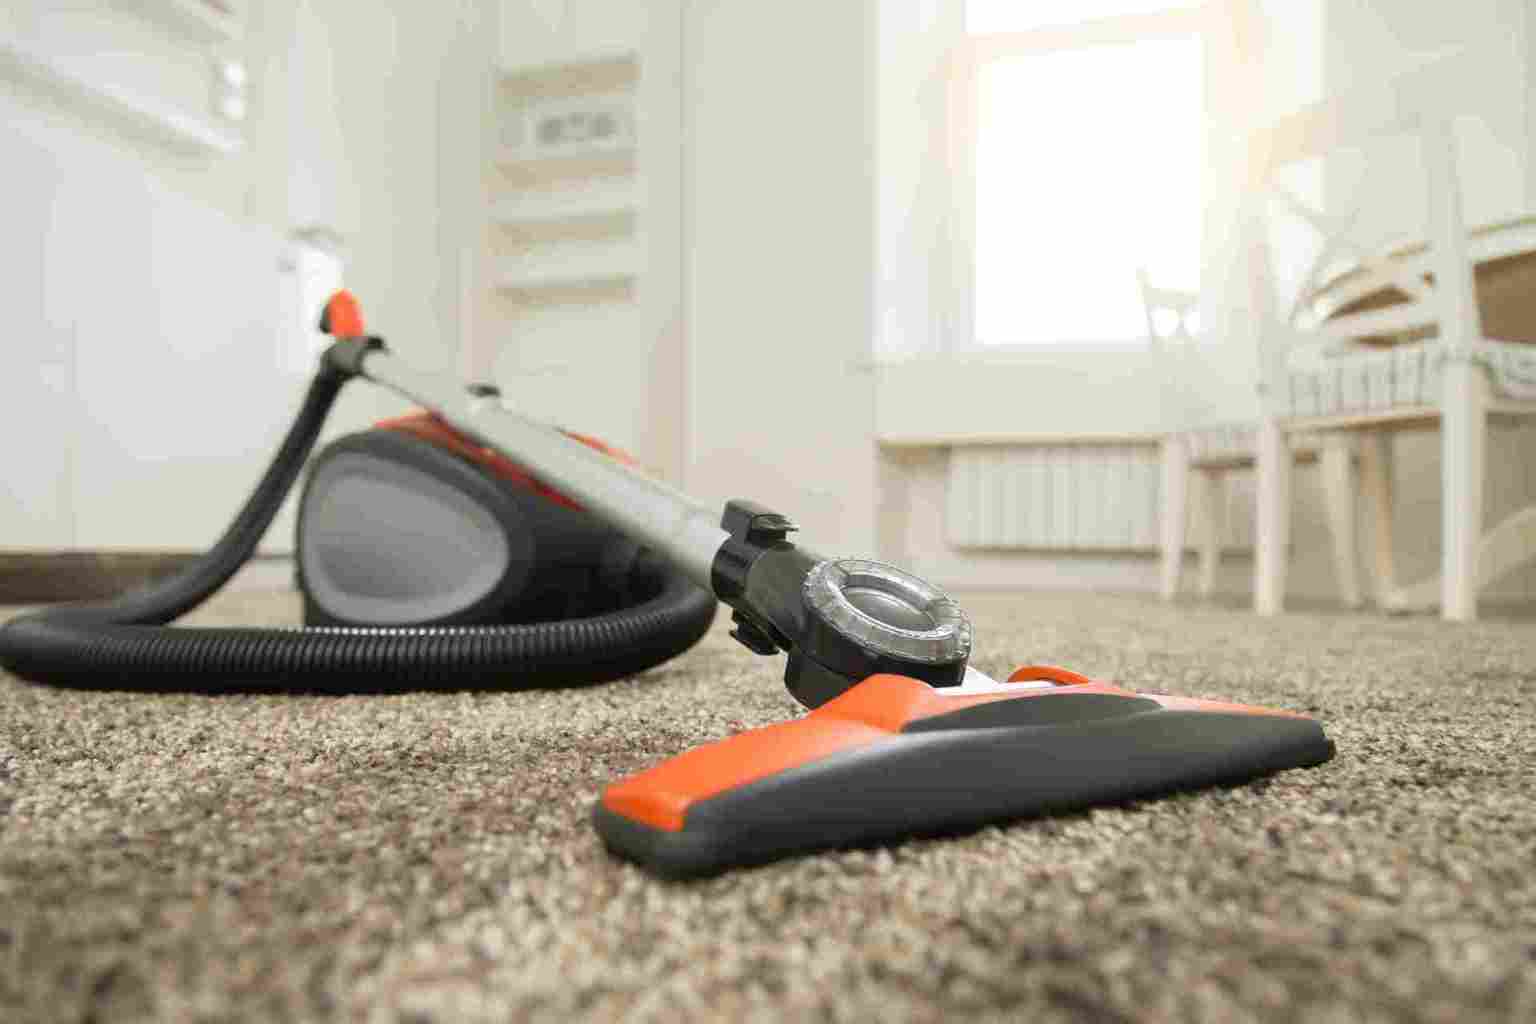 Vacuum Cleaner Buying Guide: Features To Consider